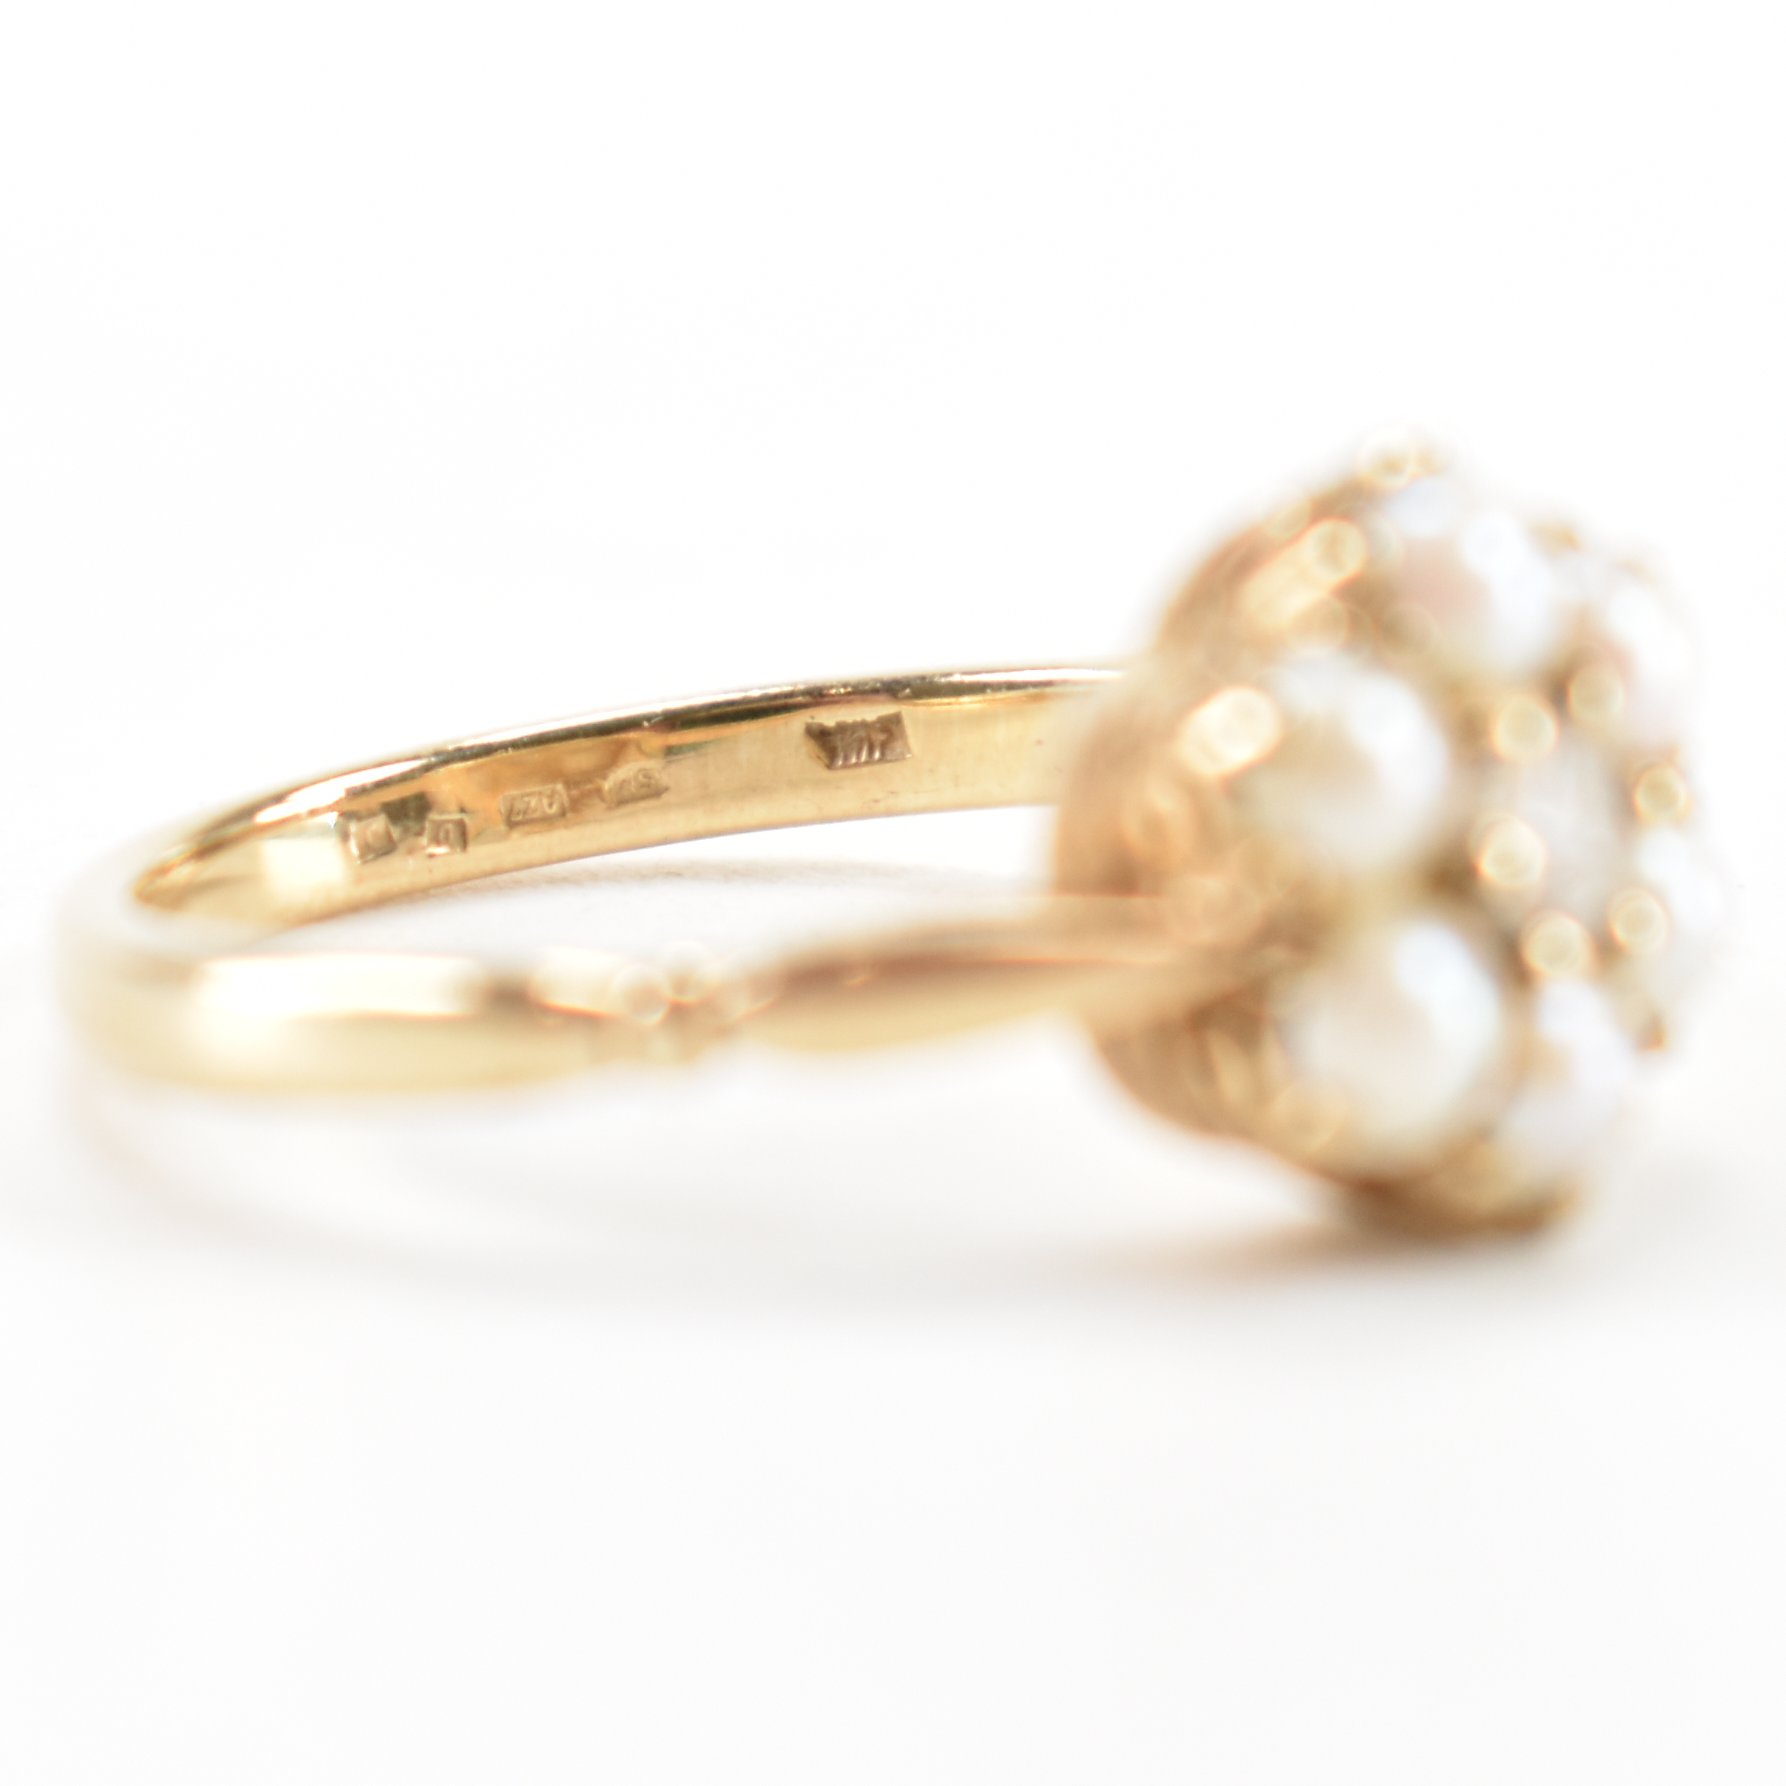 HALLMRKED 9CT GOLD CULTURED PEARL & DIAMOND RING - Image 5 of 8